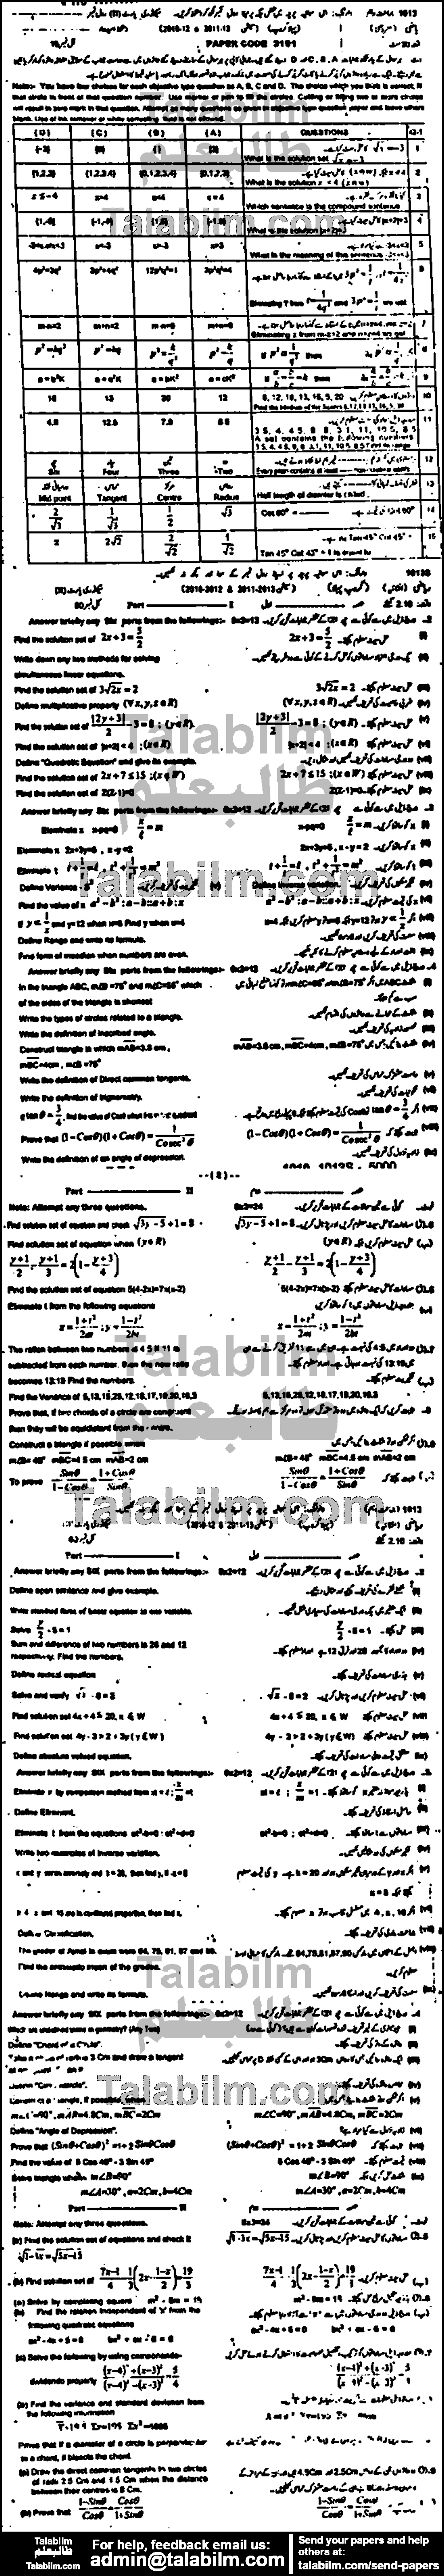 Math 0 past paper for 2013 Group-I